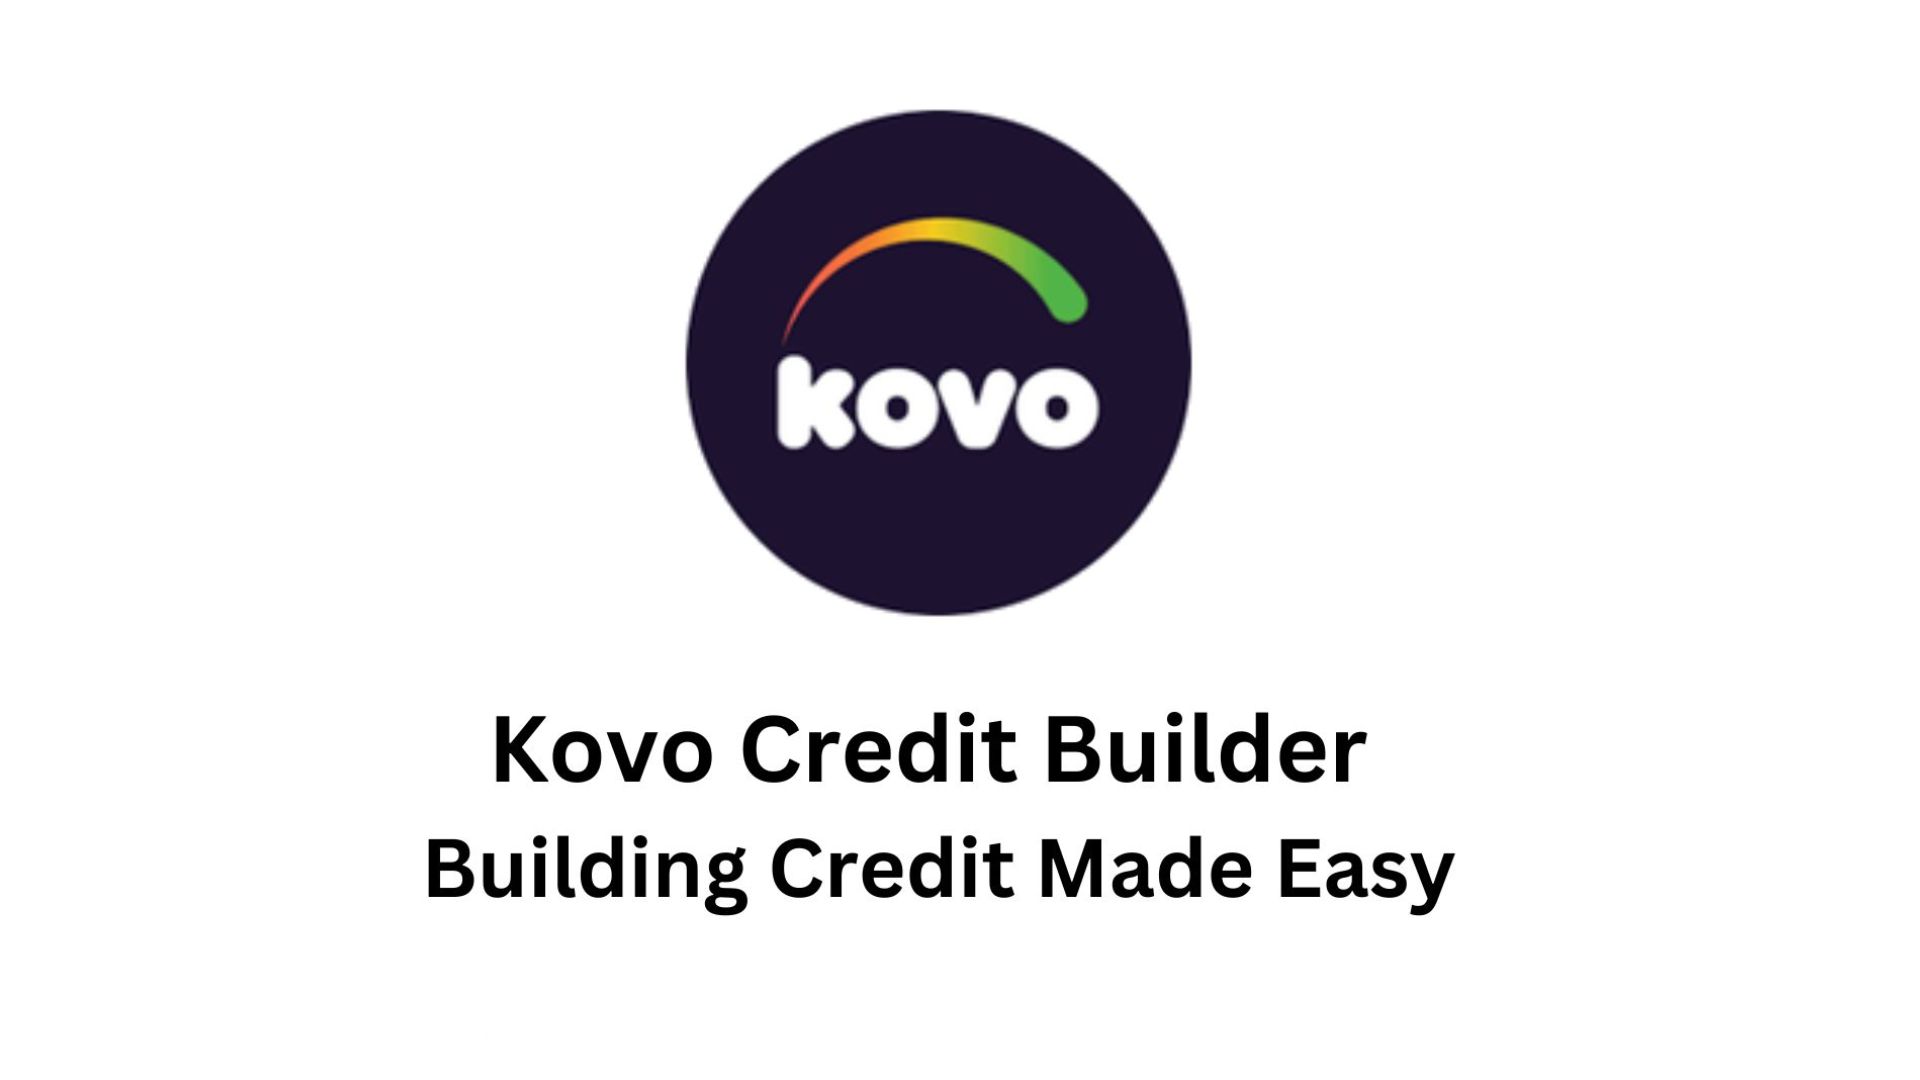 What is Kovo Credit?